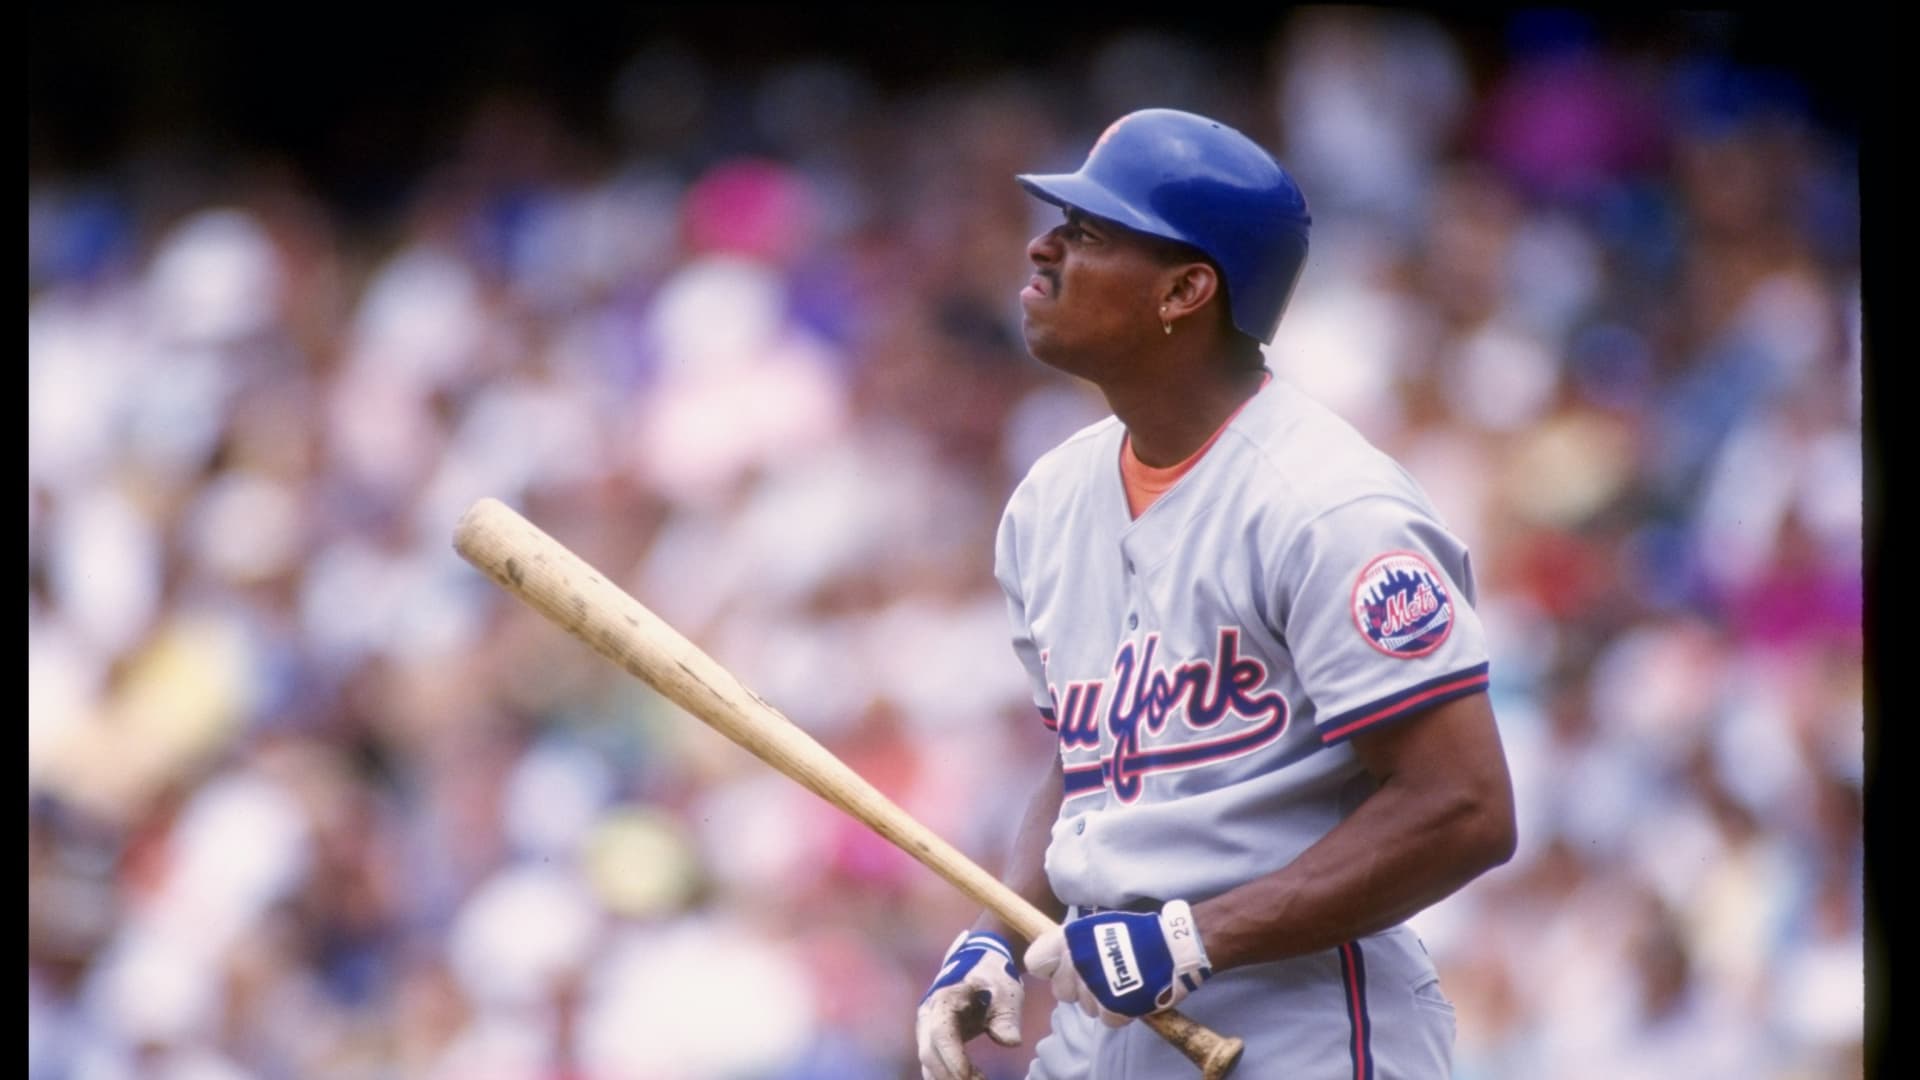 While investors can’t expect a deal like former baseball star Bobby Bonilla, they can use an annuity to create a stream of income in retirement